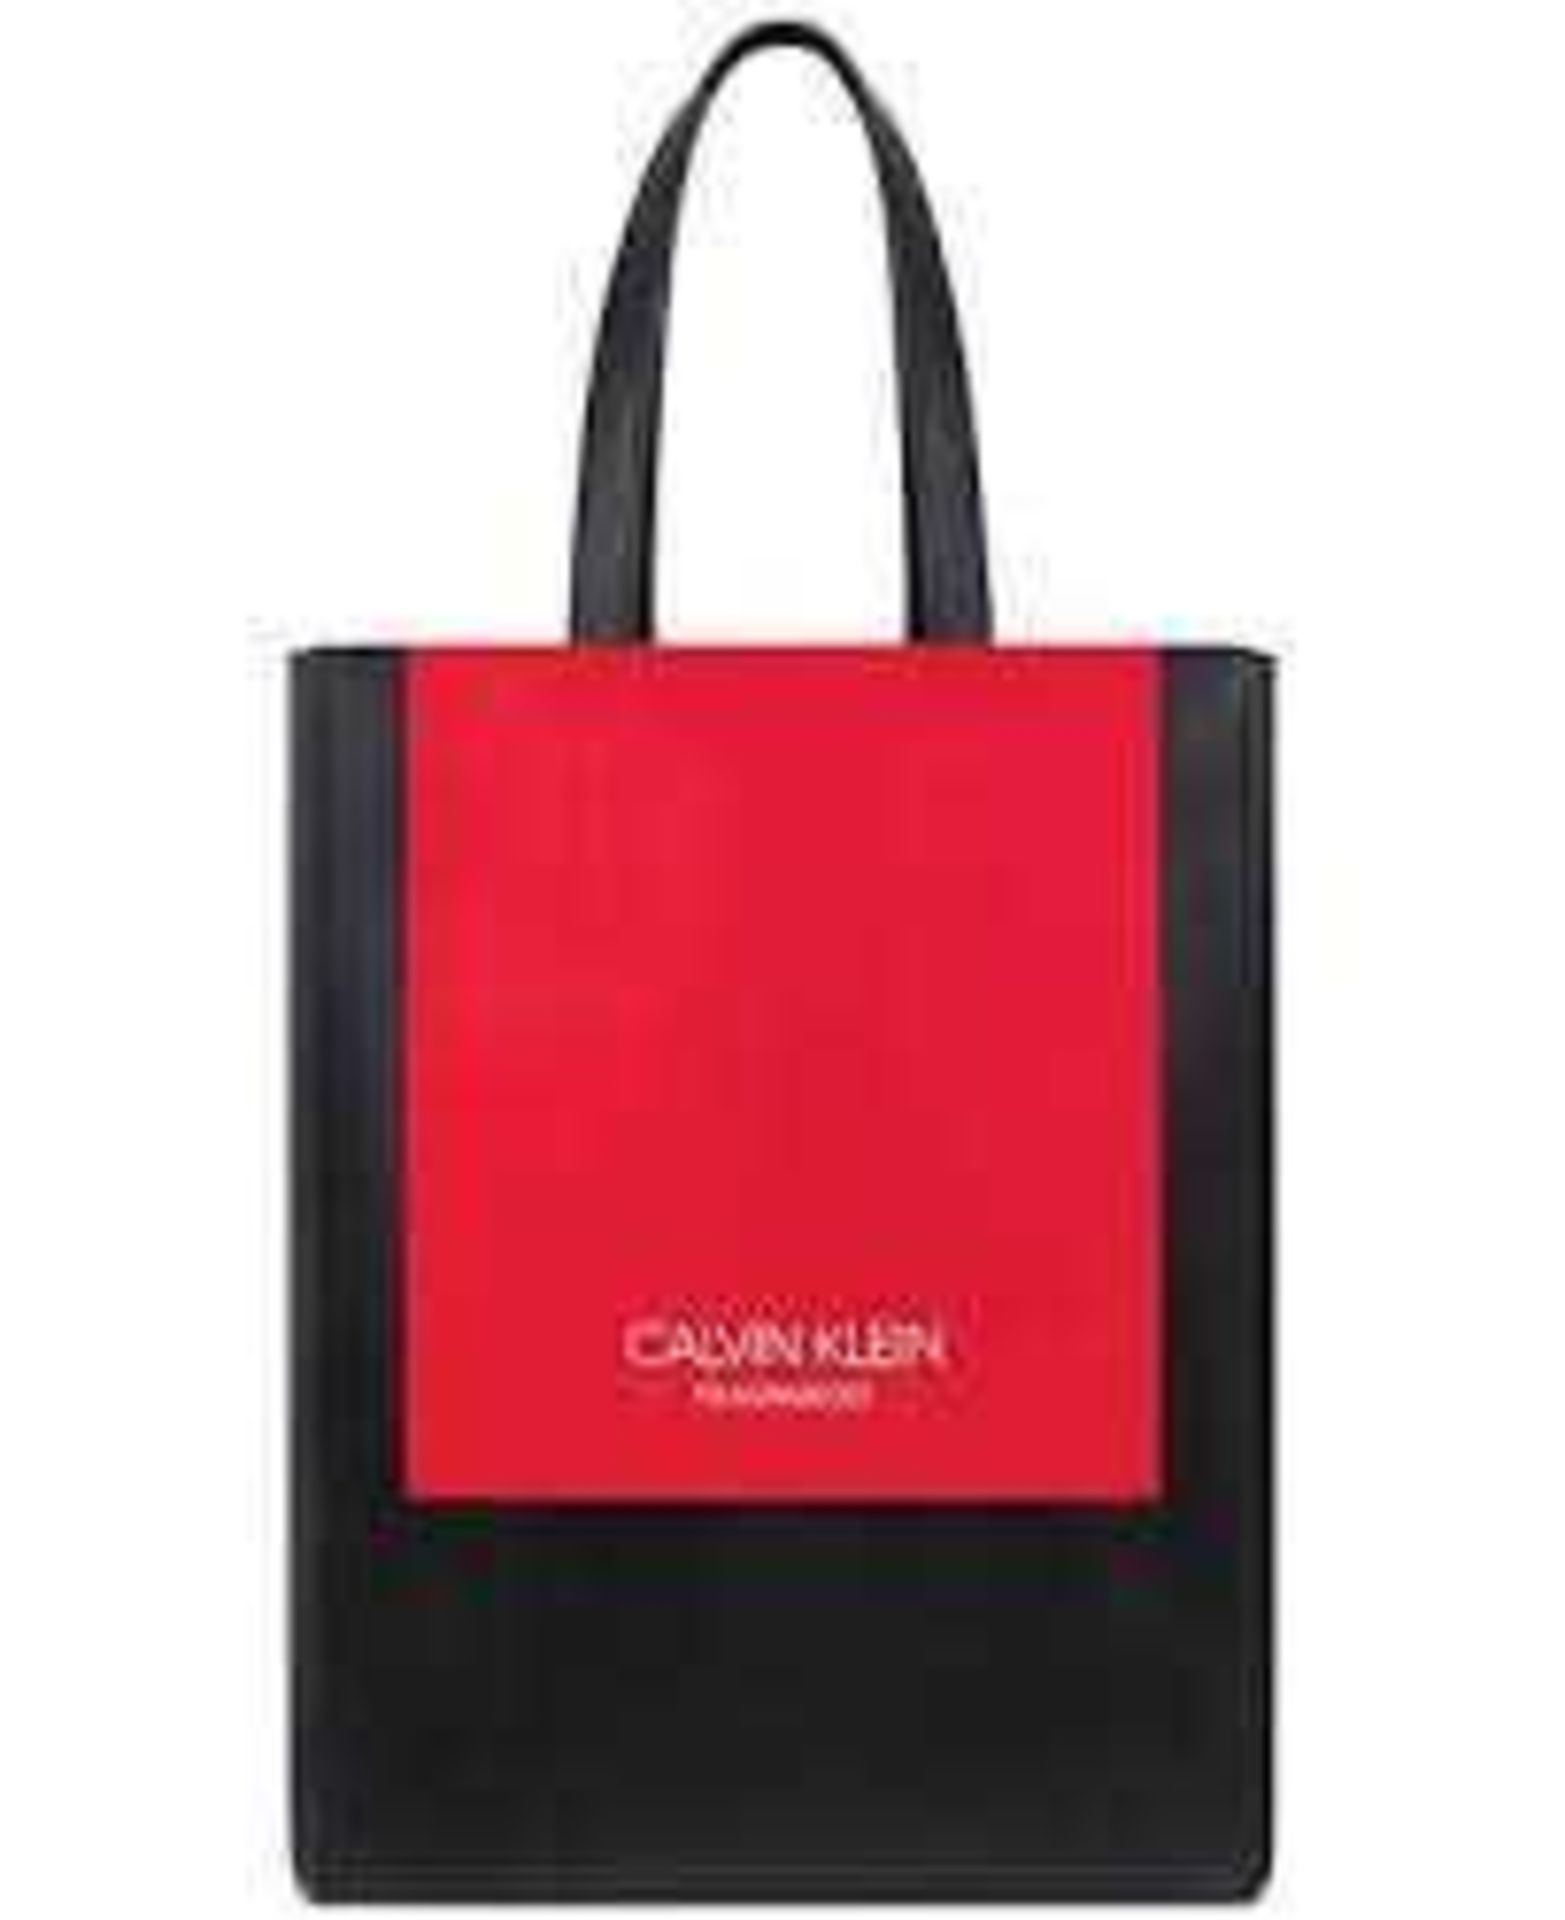 RRP £50 Calvin Klein Fragrances Black And Red Tote Bag (Bagged And Tagged)